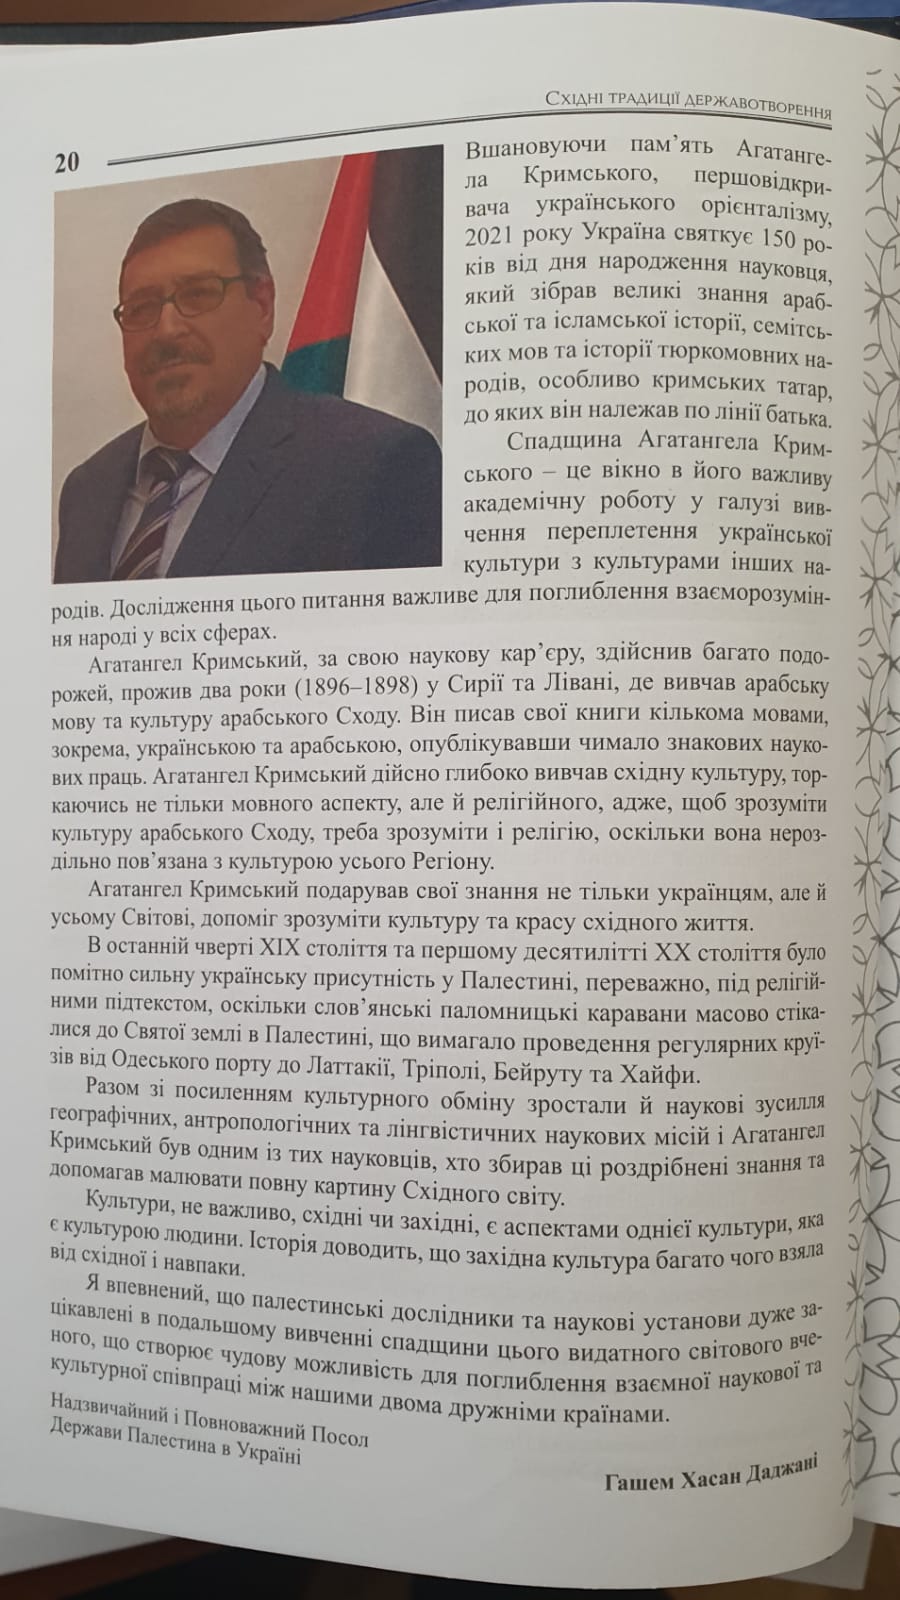 Article by H.E. Ambassador Hashem Dajani in the scientific book “Eastern traditions of state formation” dedicated to the 150th anniversary of the birth of Ahatanhel Krymsky